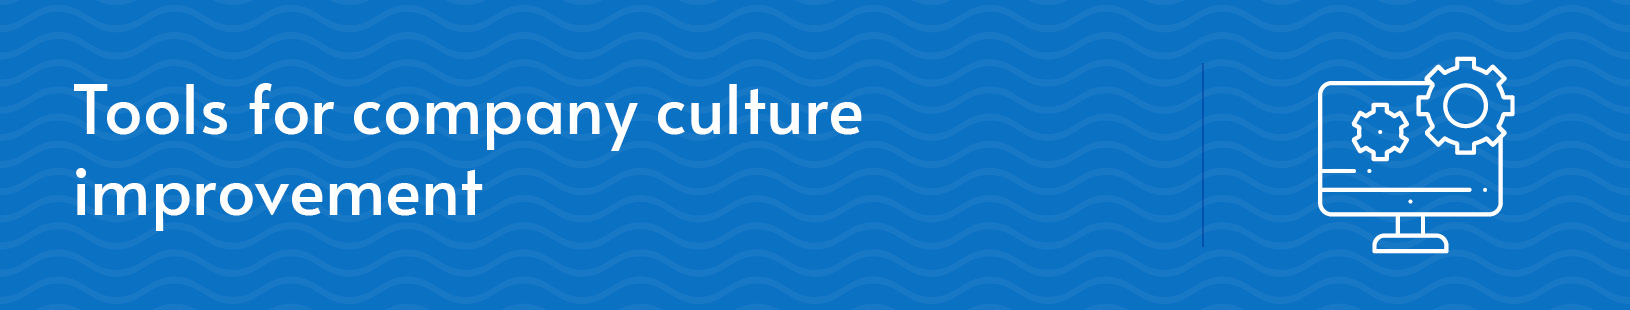 This section will provide suggestions for tools you can use to improve company culture.